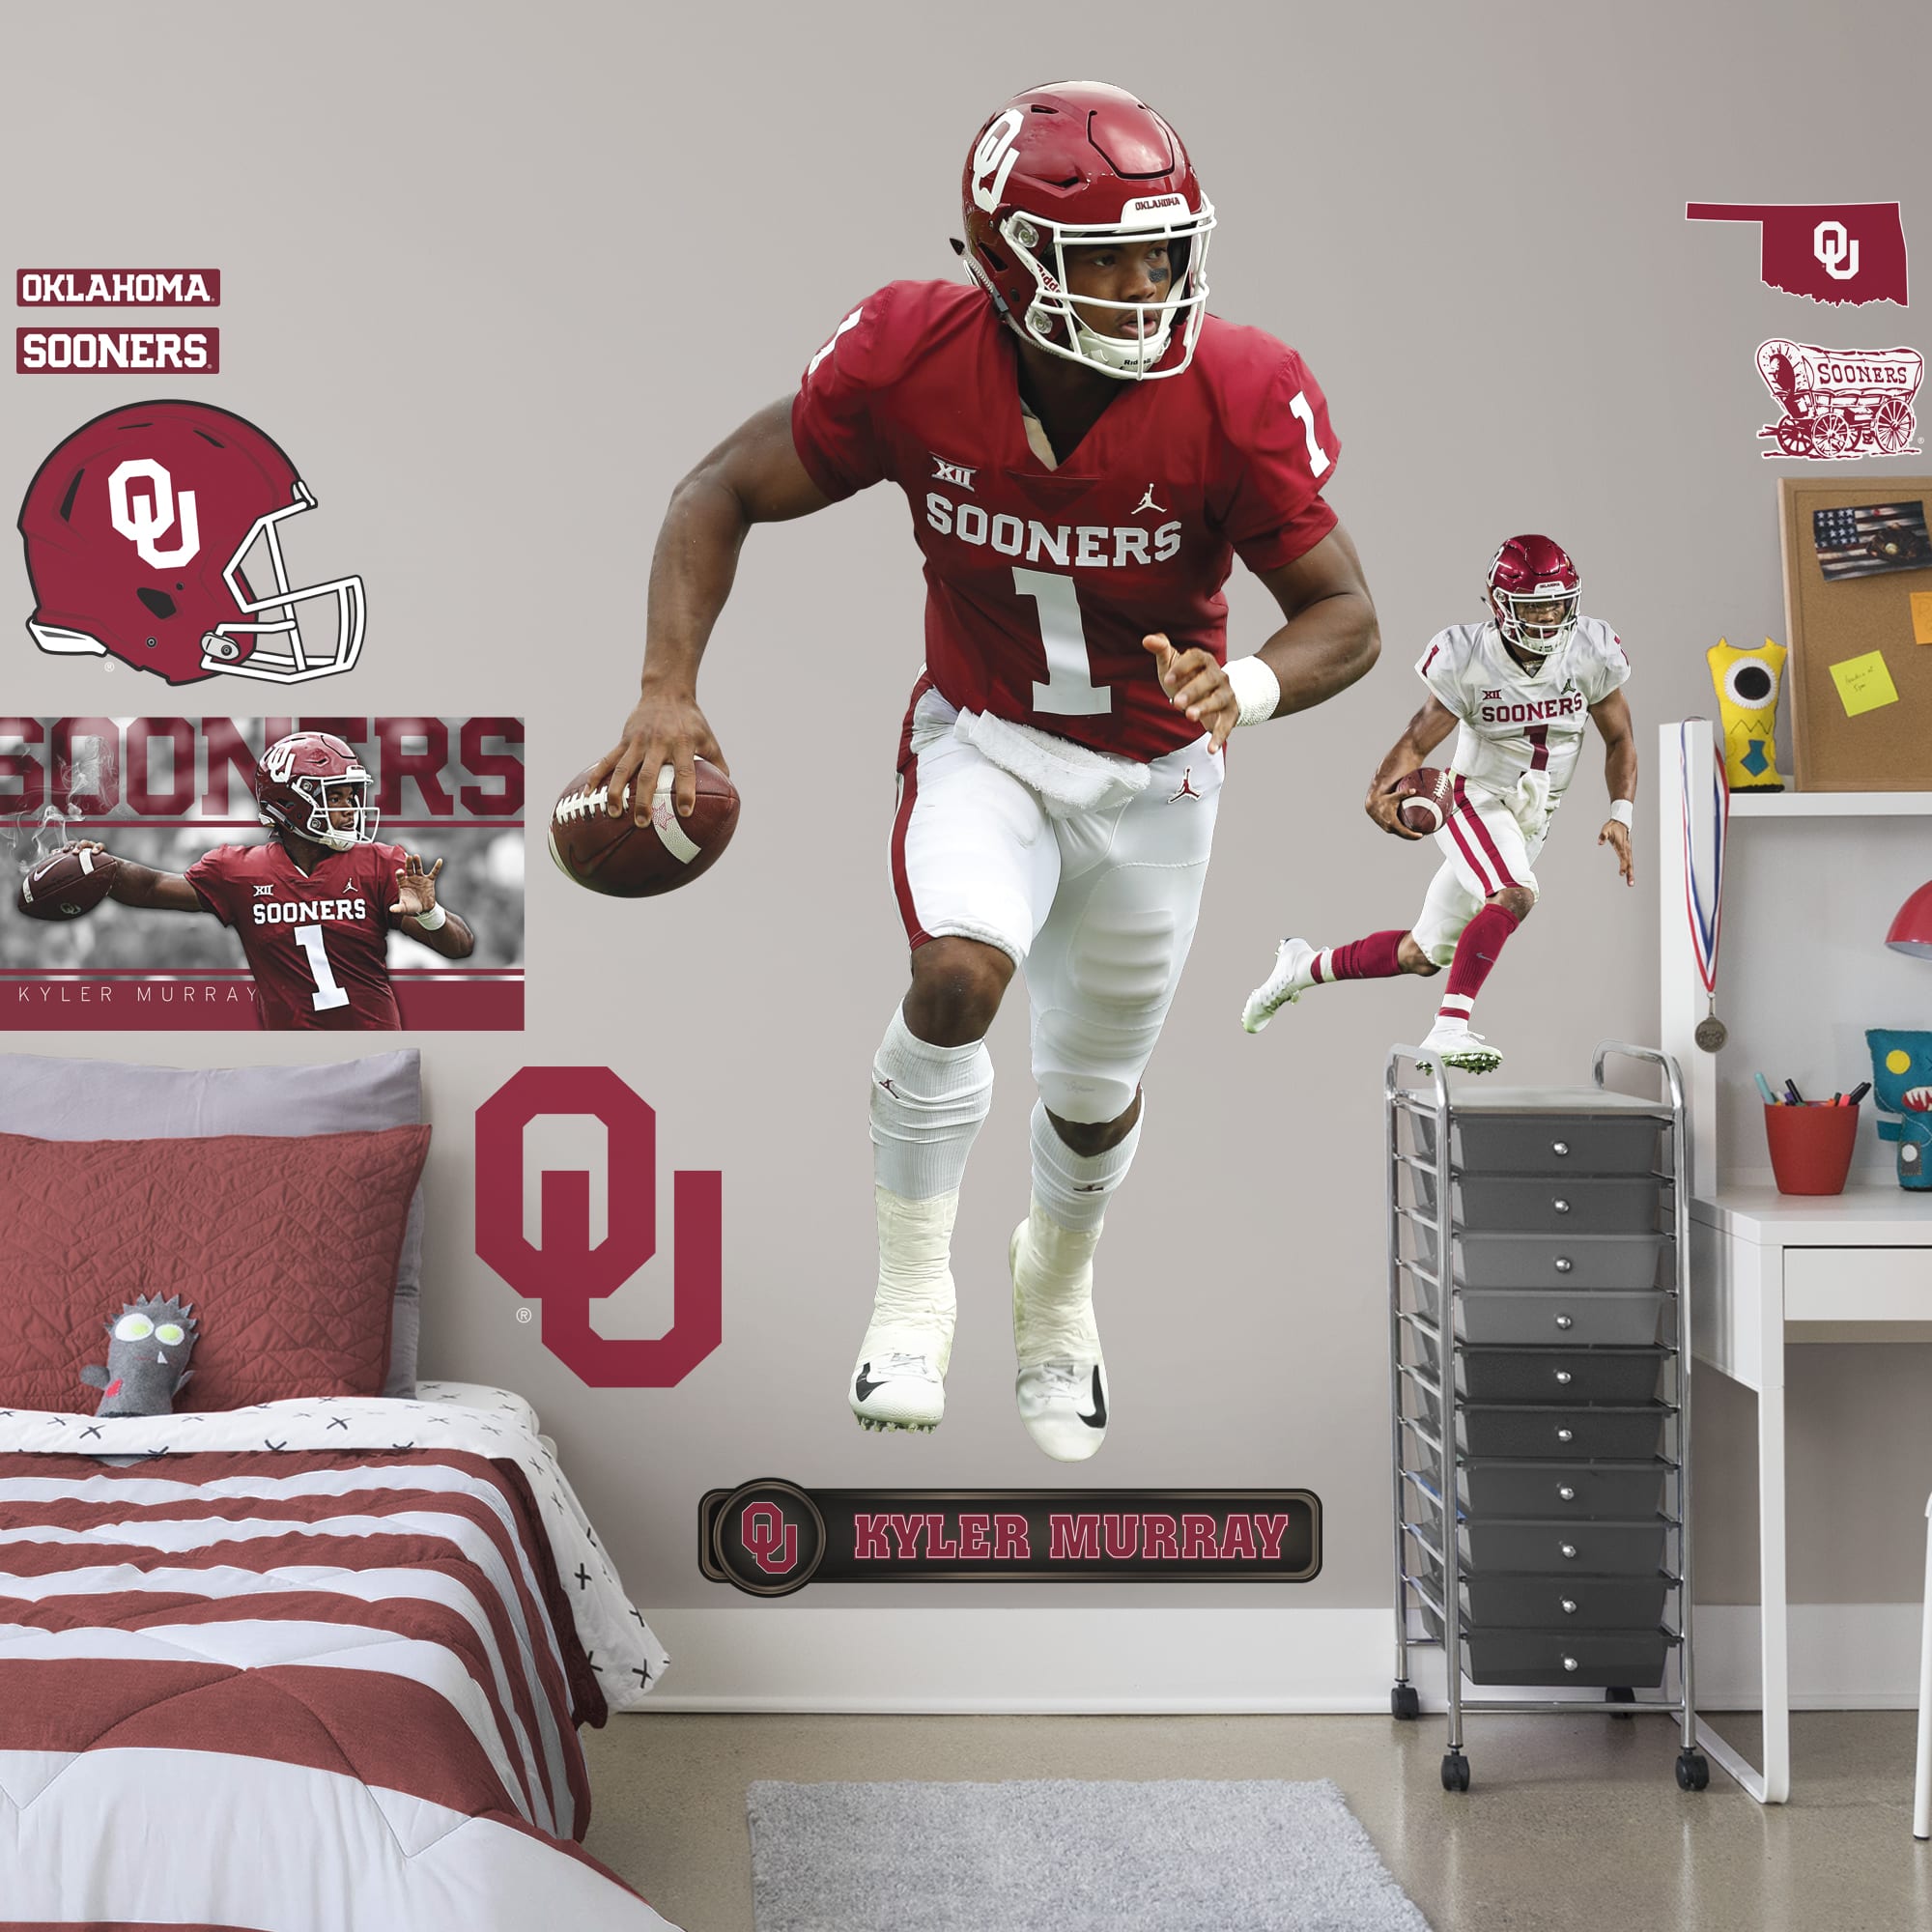 Kyler Murray for Oklahoma Sooners: Oklahoma - Officially Licensed Removable Wall Decal Life-Size Athlete + 10 Decals (44"W x 73"